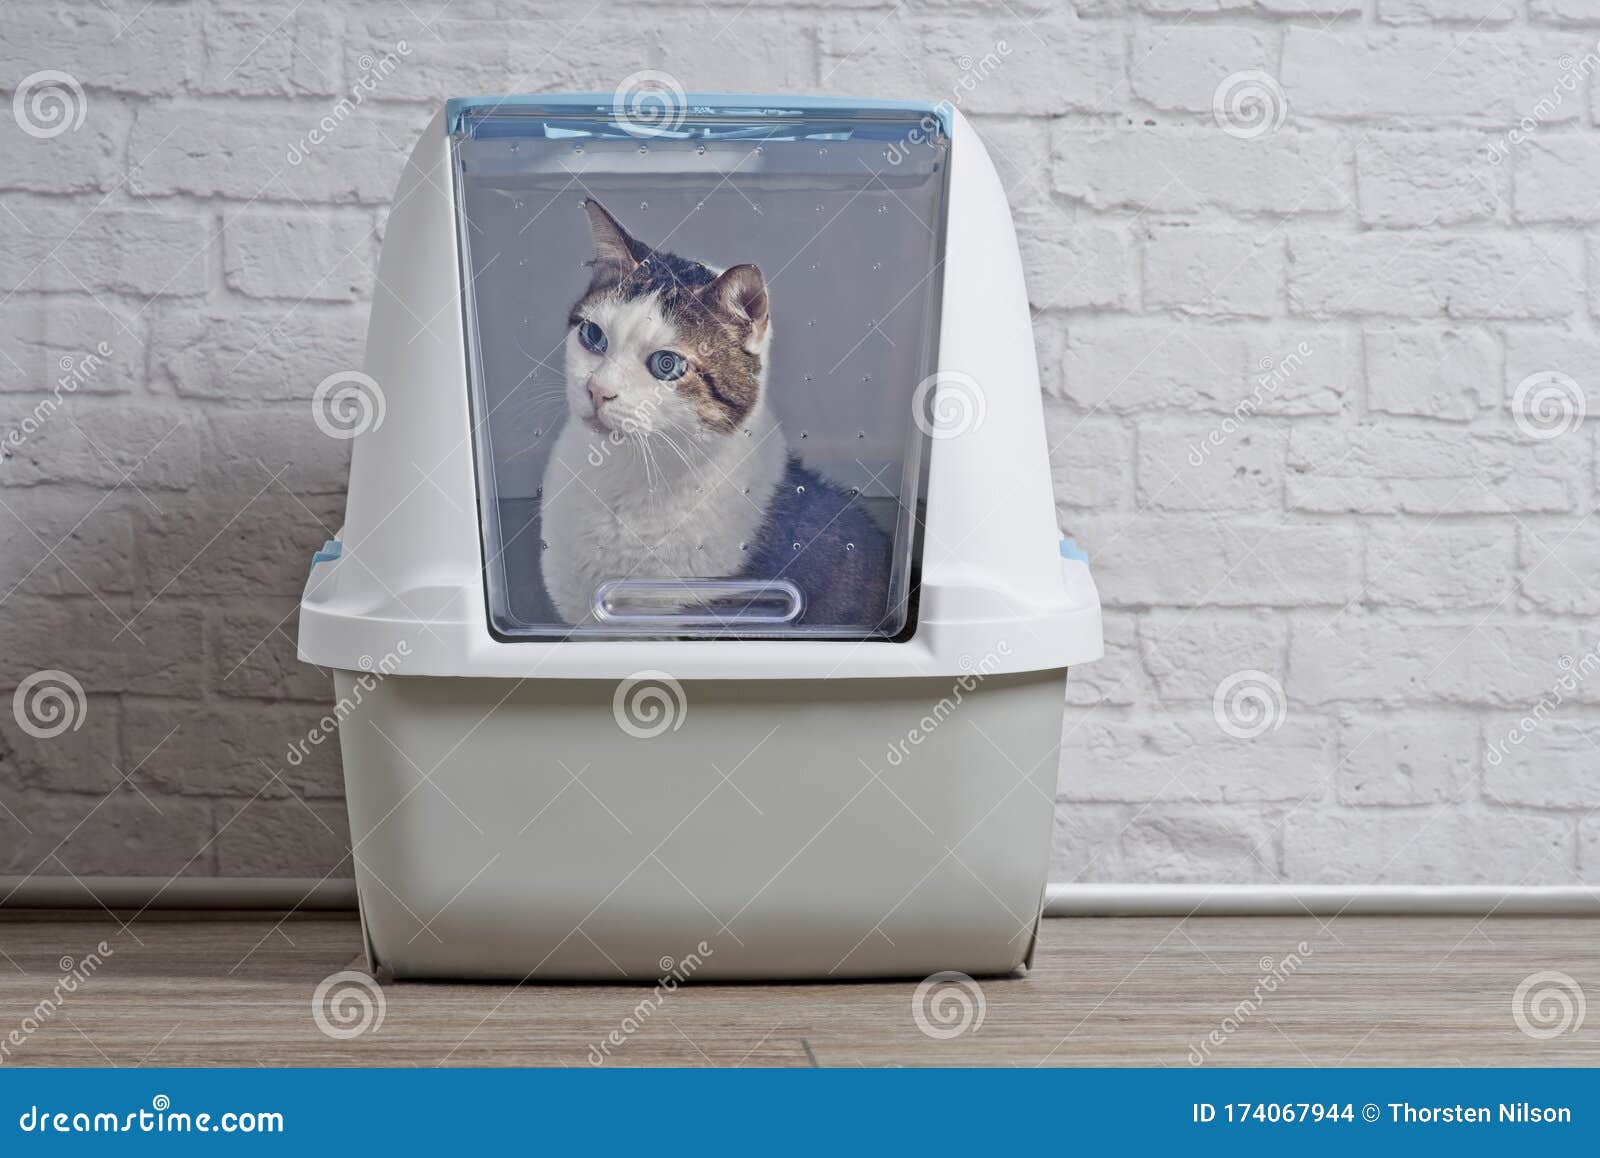 Cute Tabby Cat Sitting In A Closed Litter Box And Looking Curious